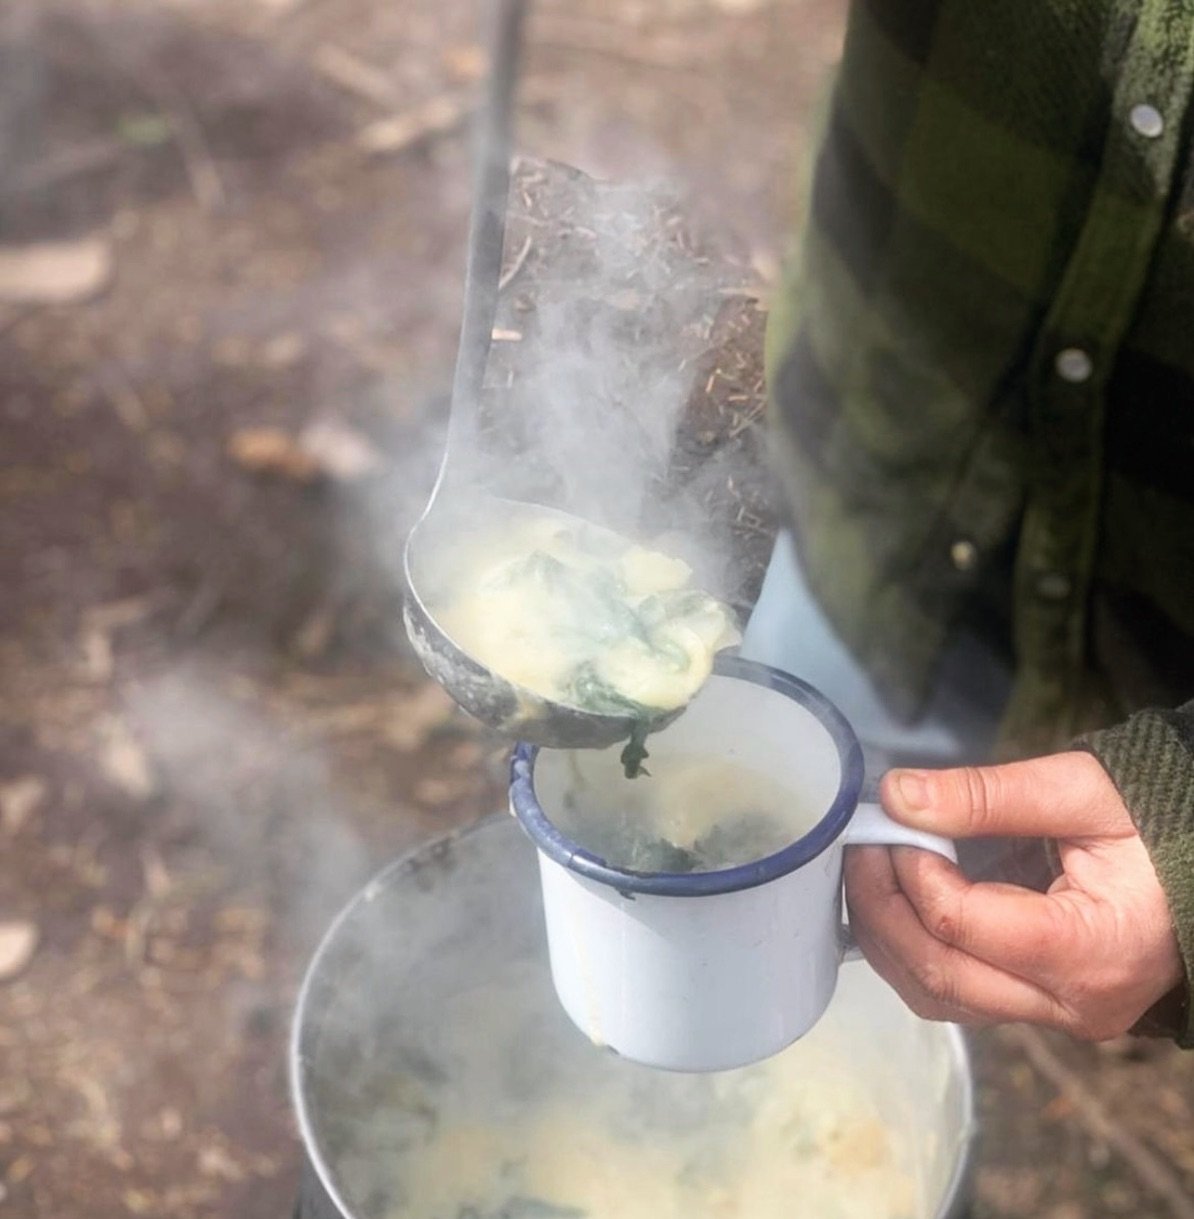 Handmade Nettle Soup on the fire! One of our easy foraging recipes at Truro Forest School 🌱